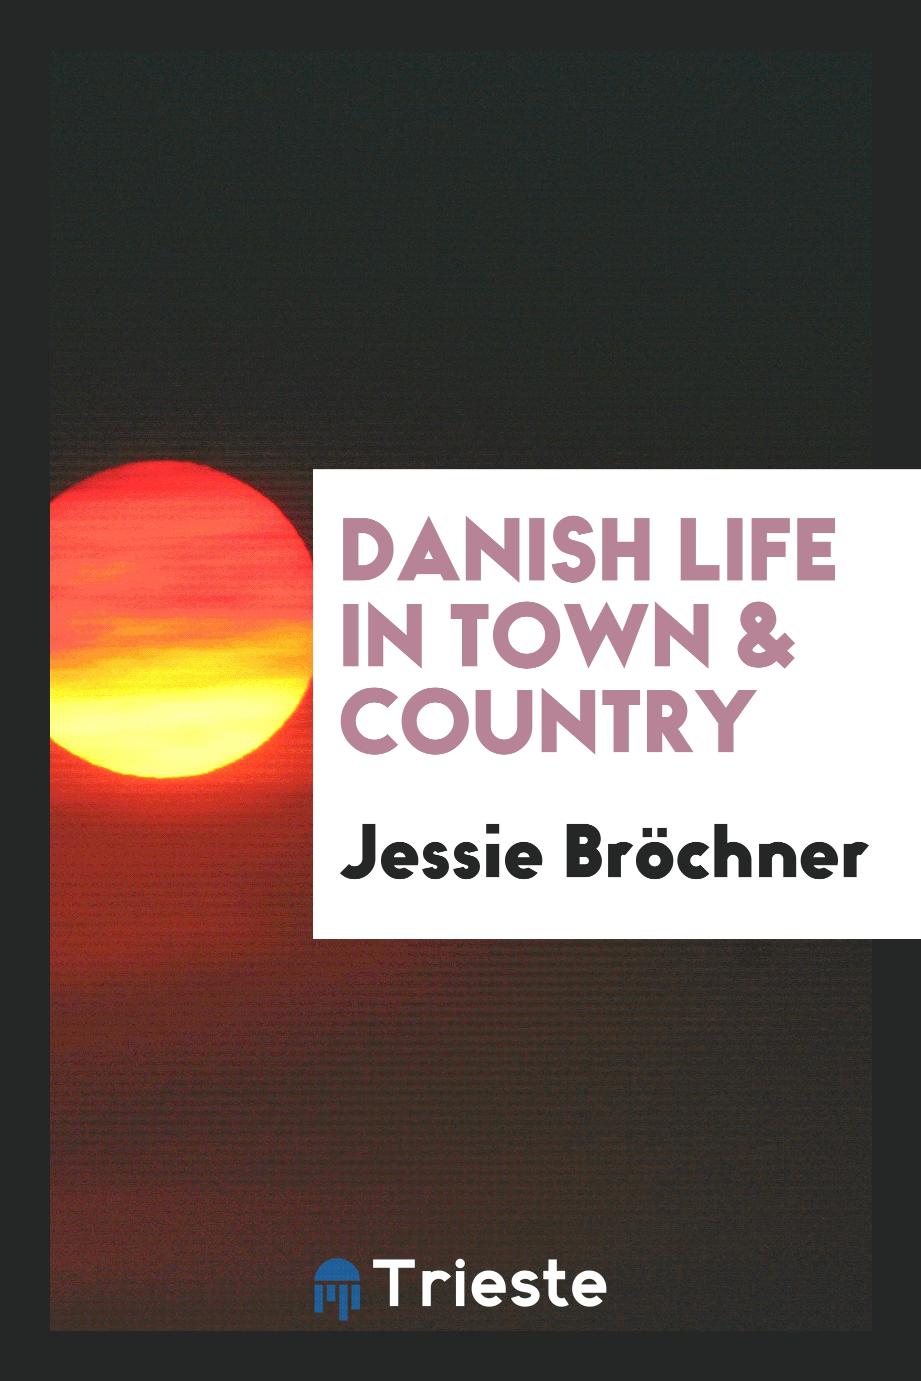 Danish life in town & country